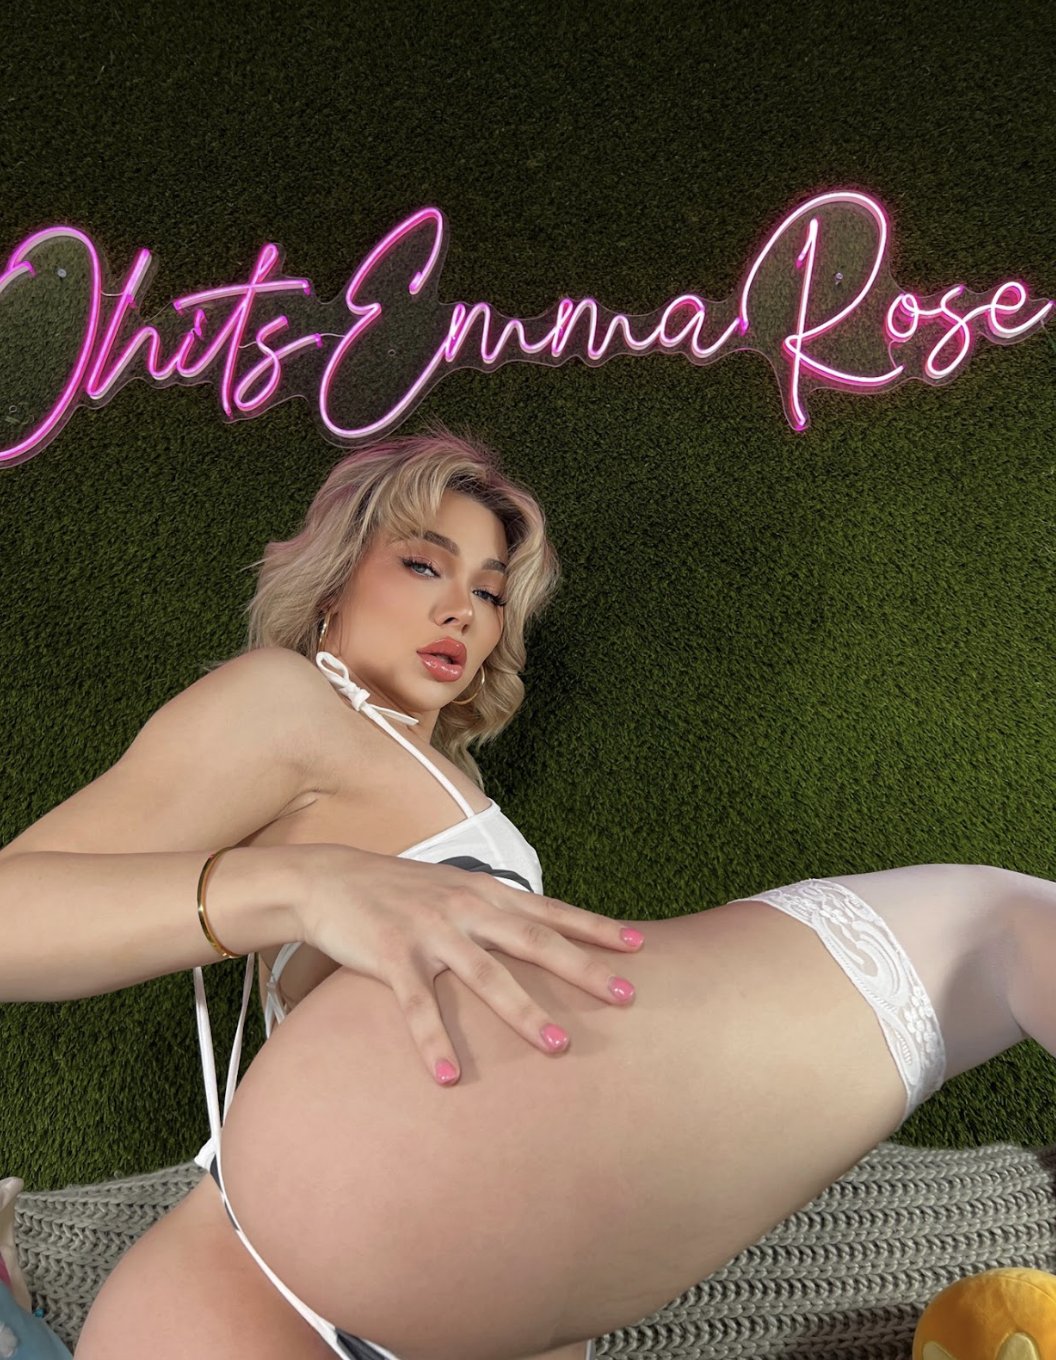 Emma Rose 🌹 vegas on X: Lunch is served on OnlyFans, it cums with milk 🐮  t.co1cRSp4dd1B  X